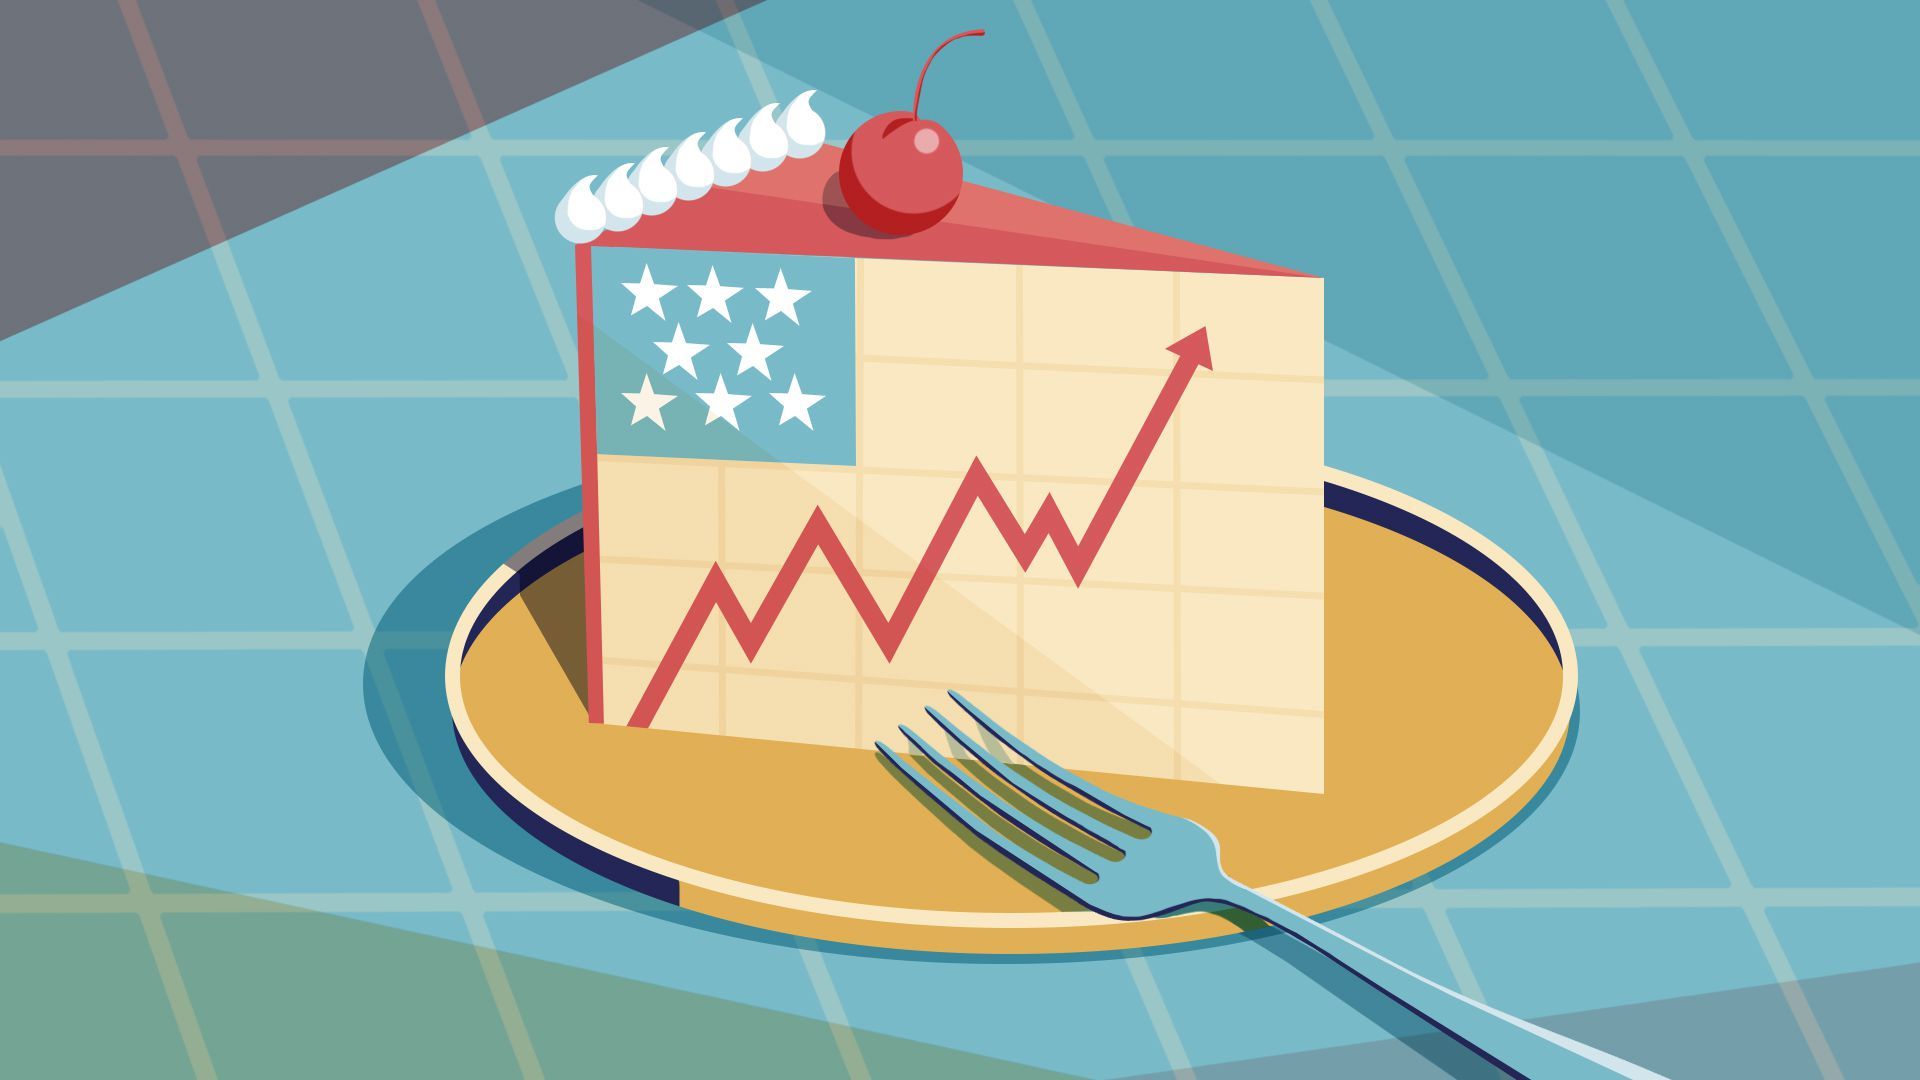 Illustration of a slice of pie in the shape of an American flag with chart elements